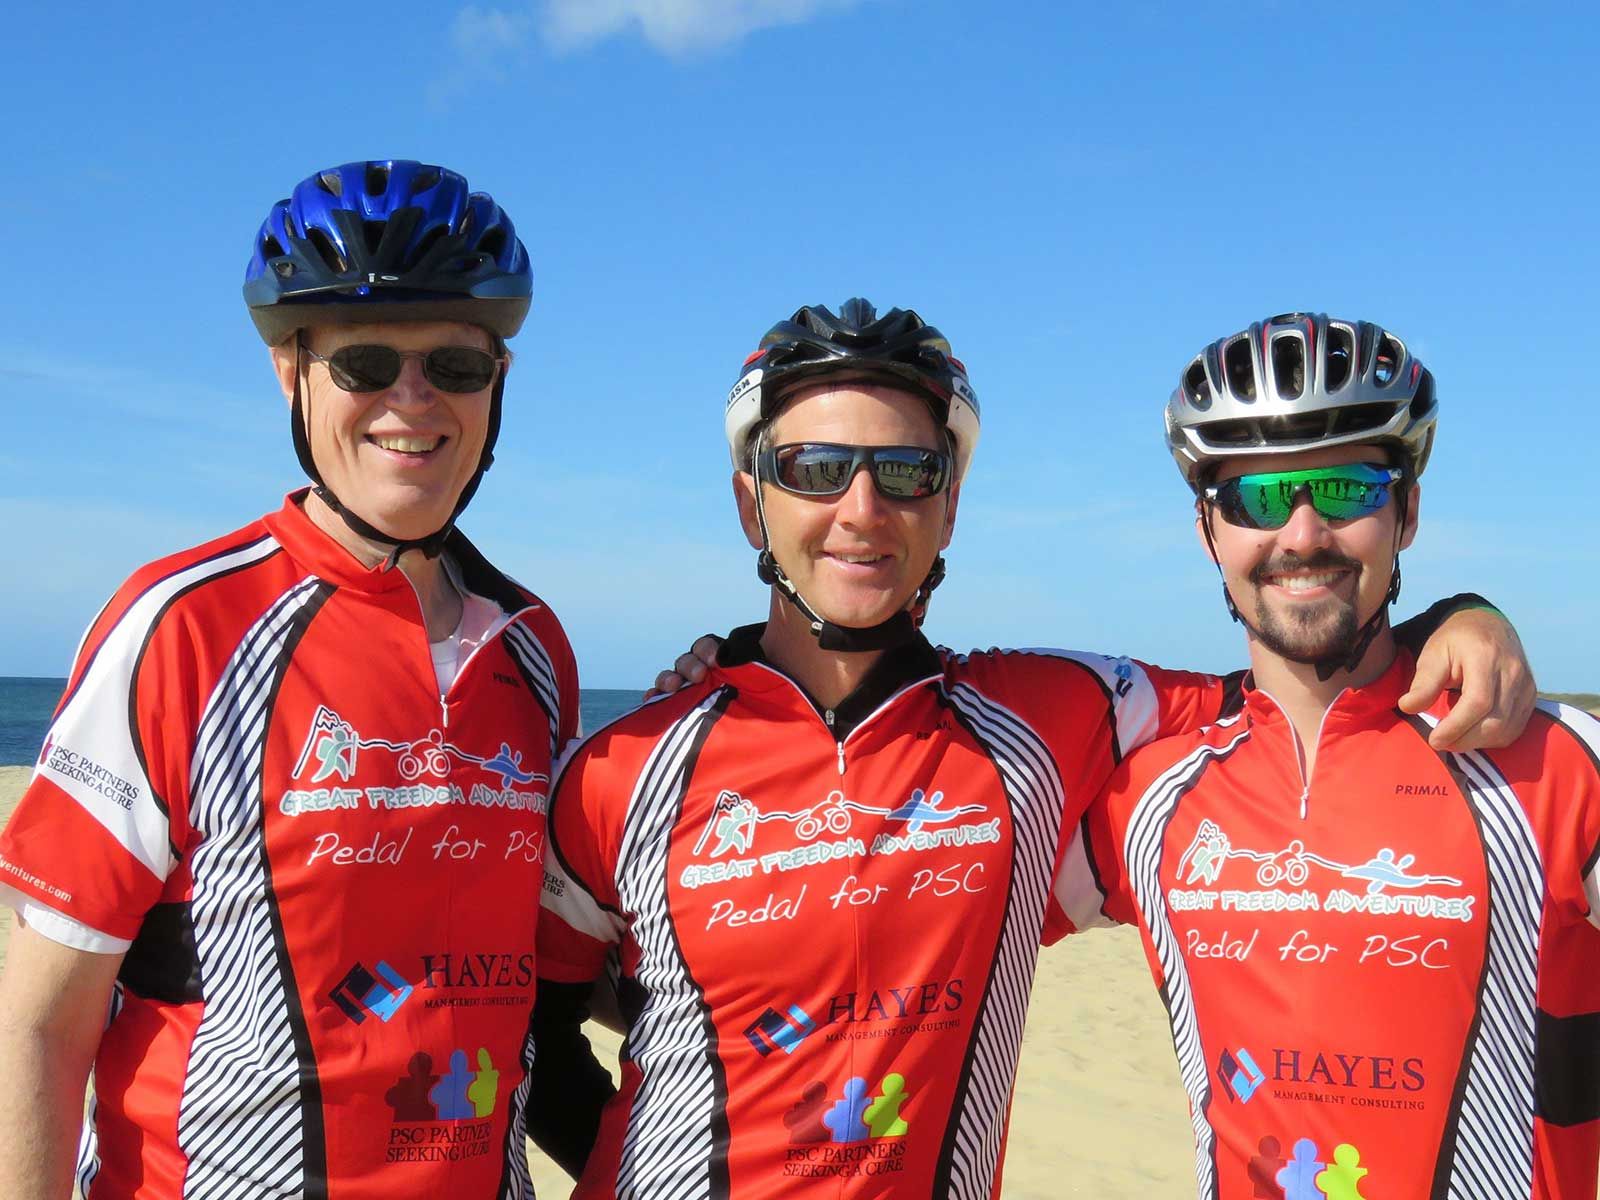 Three men in bicycle helmets stand in a line with their arms around each other. Their shirts read Pedal for PSC